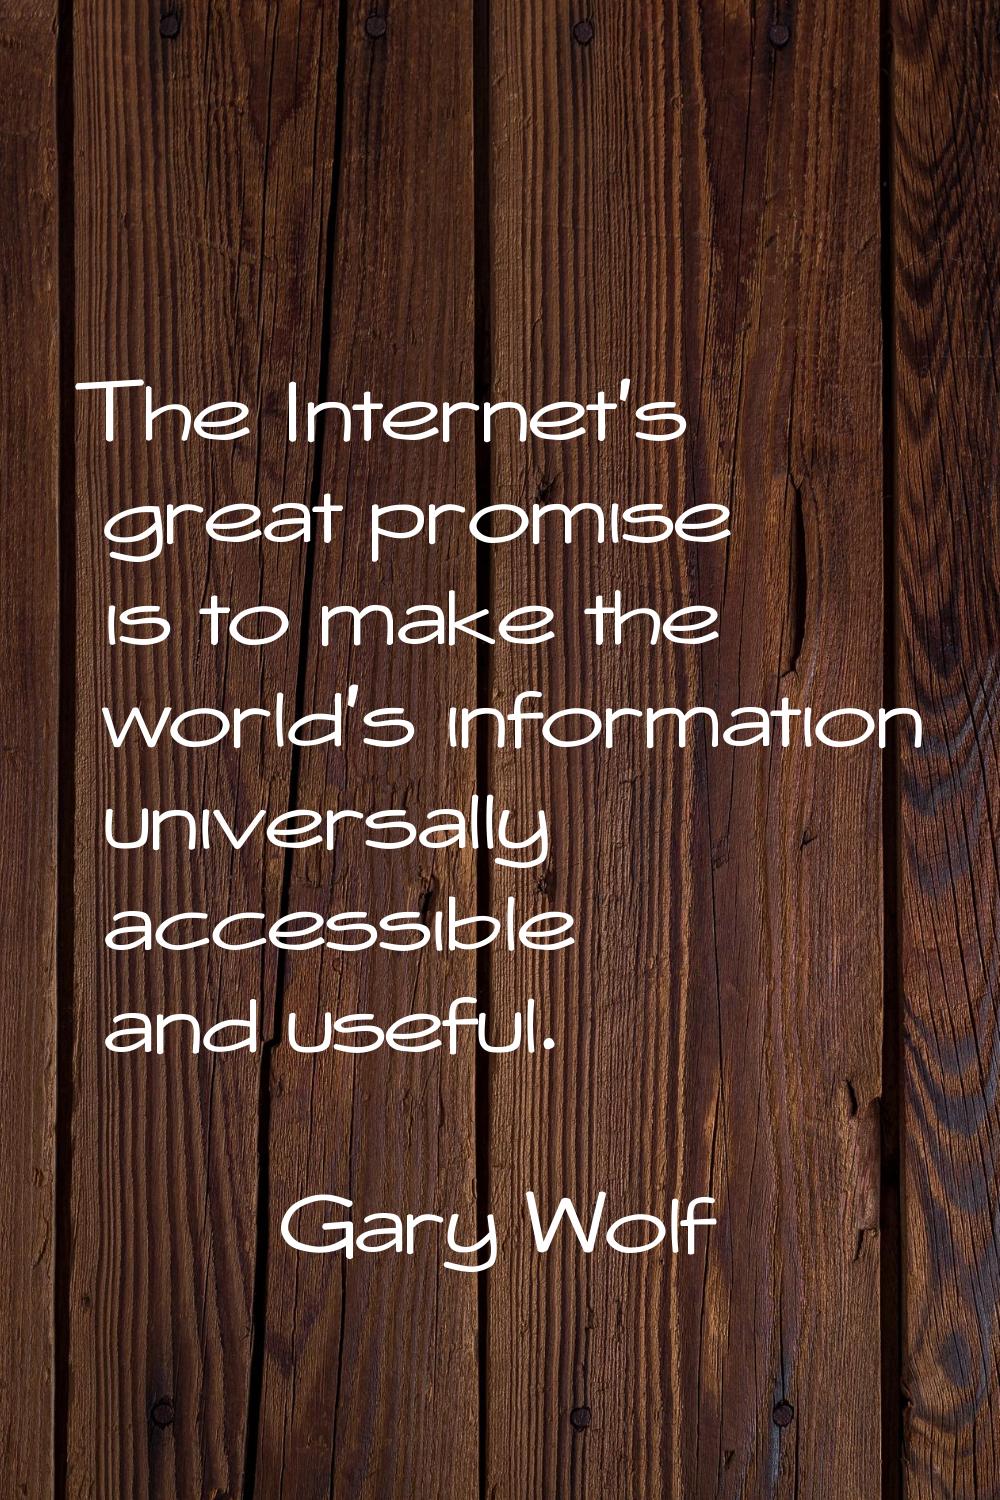 The Internet's great promise is to make the world's information universally accessible and useful.